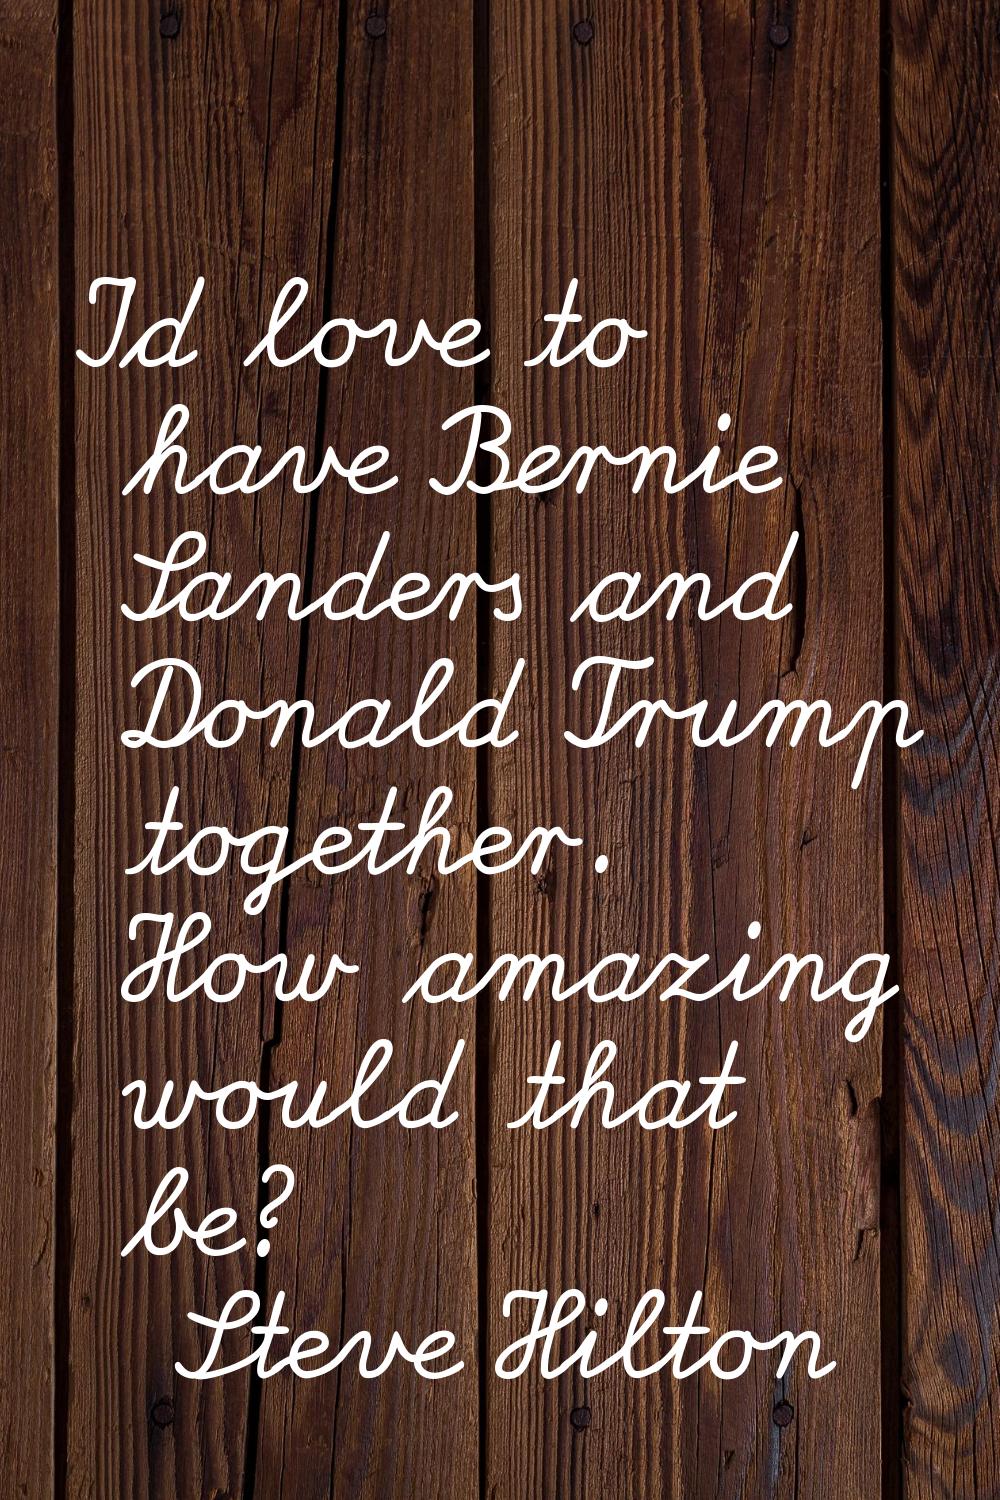 I'd love to have Bernie Sanders and Donald Trump together. How amazing would that be?